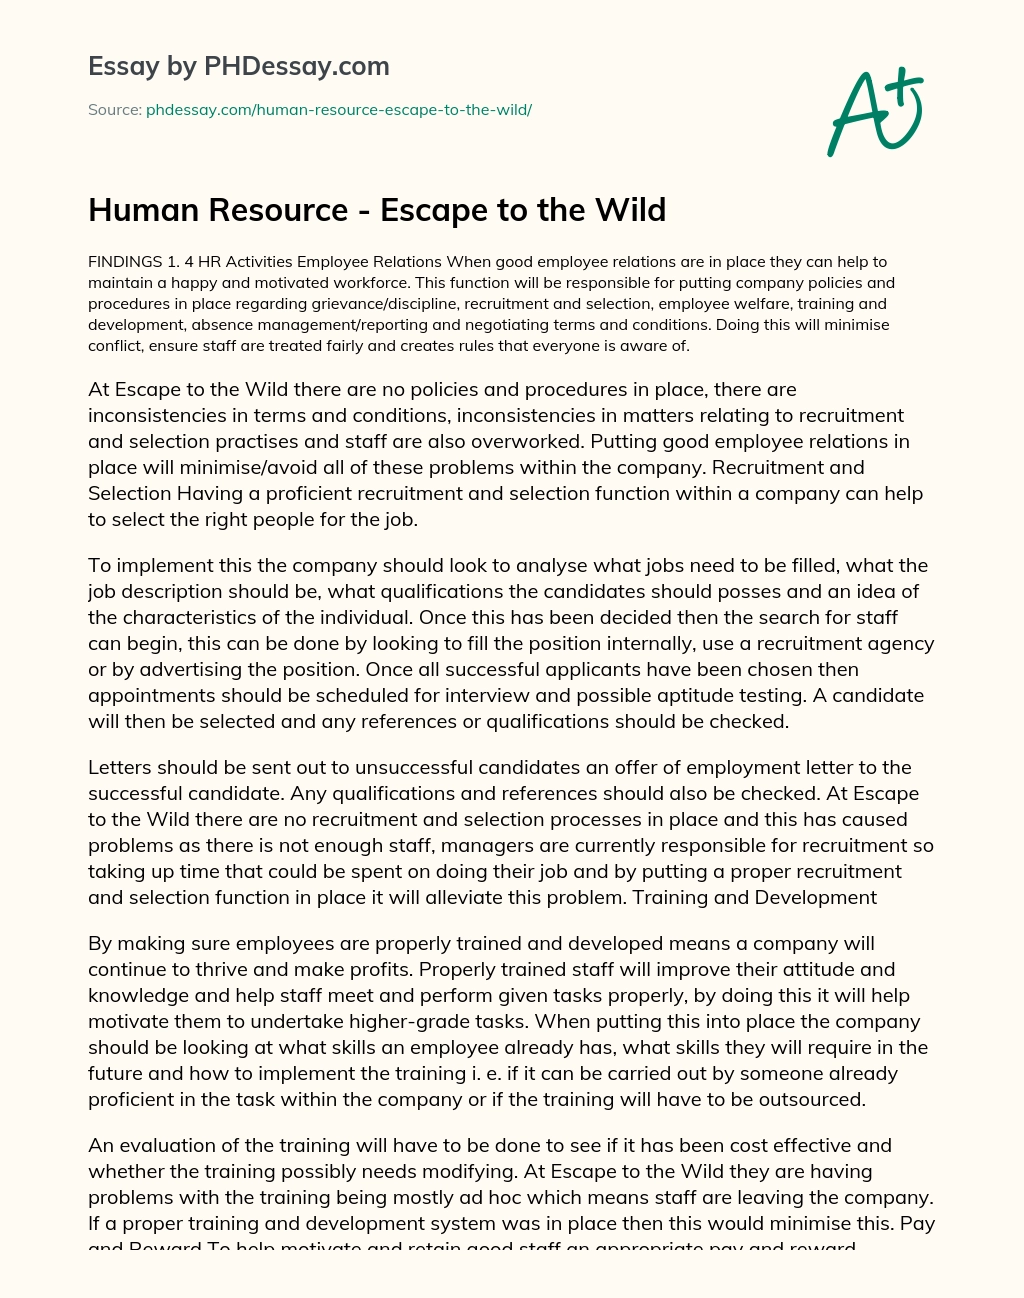 Human Resource – Escape to the Wild essay